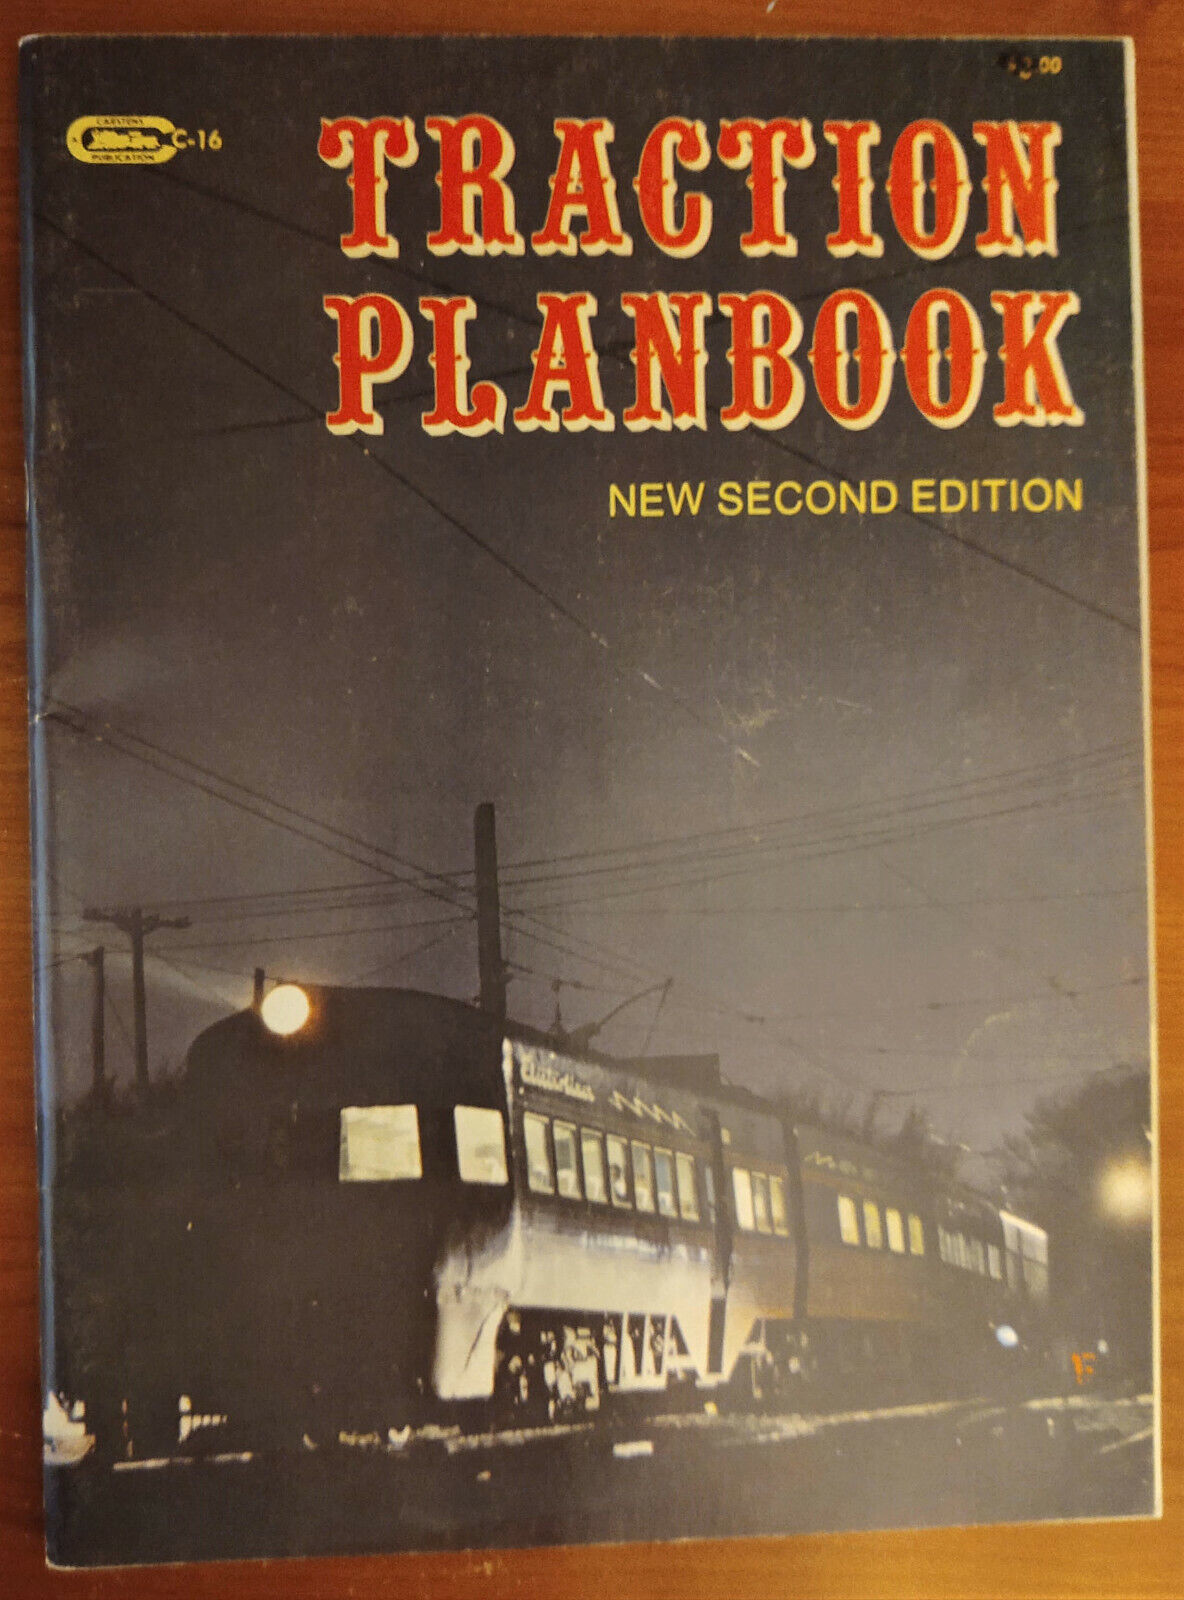 TRACTION PLANBOOK second edition Harold H Carstens Railroad Model Craftsman 1968